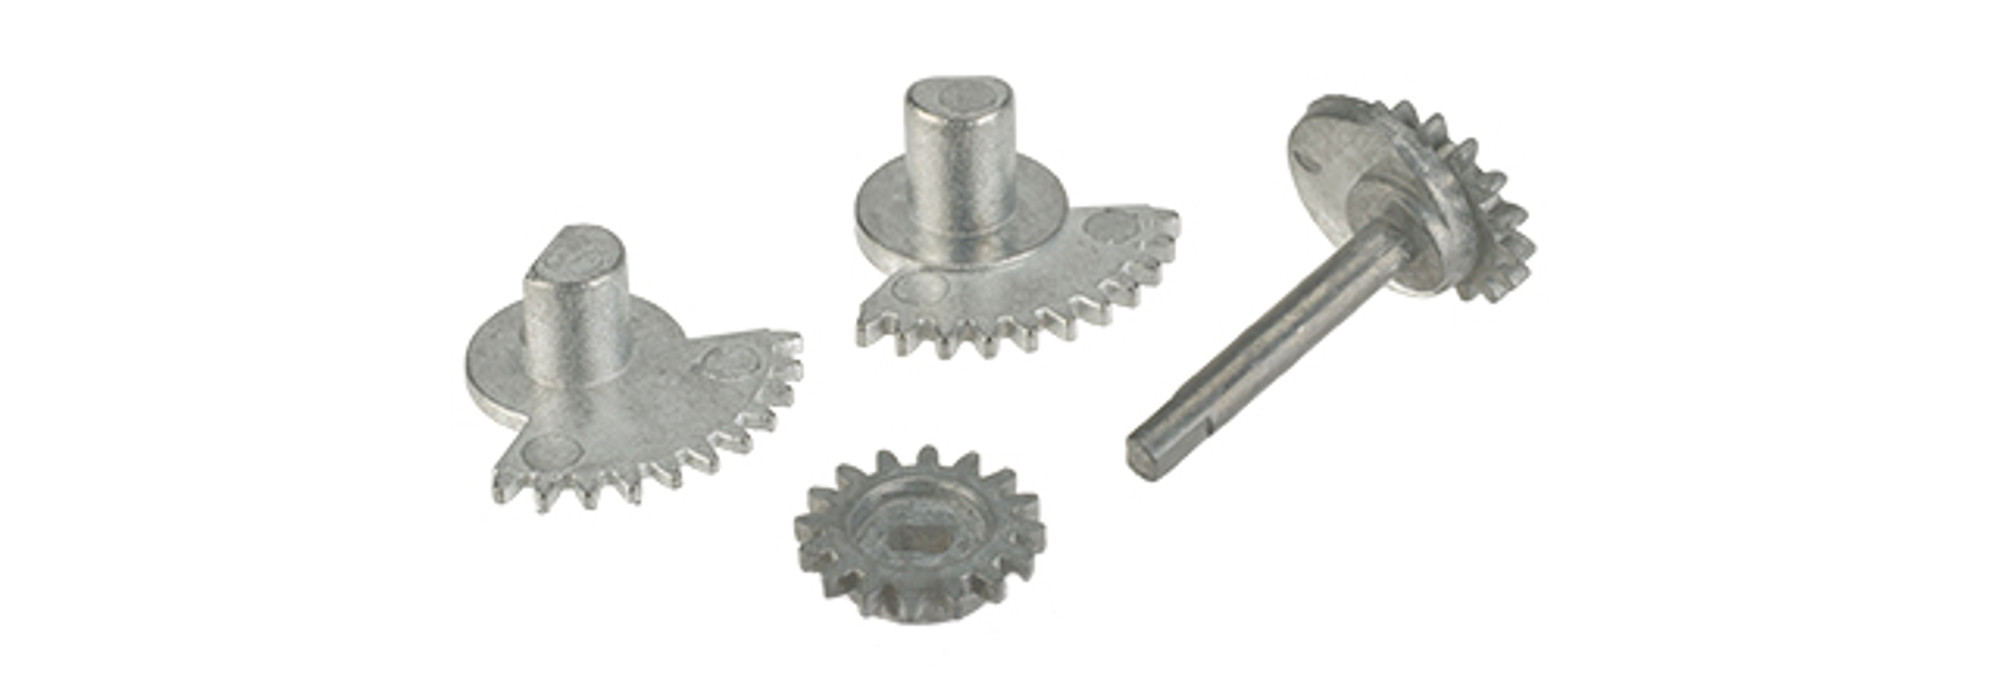 Metal Selector Gear for ASC / SCAR Airsoft AEG Rifle by AGM